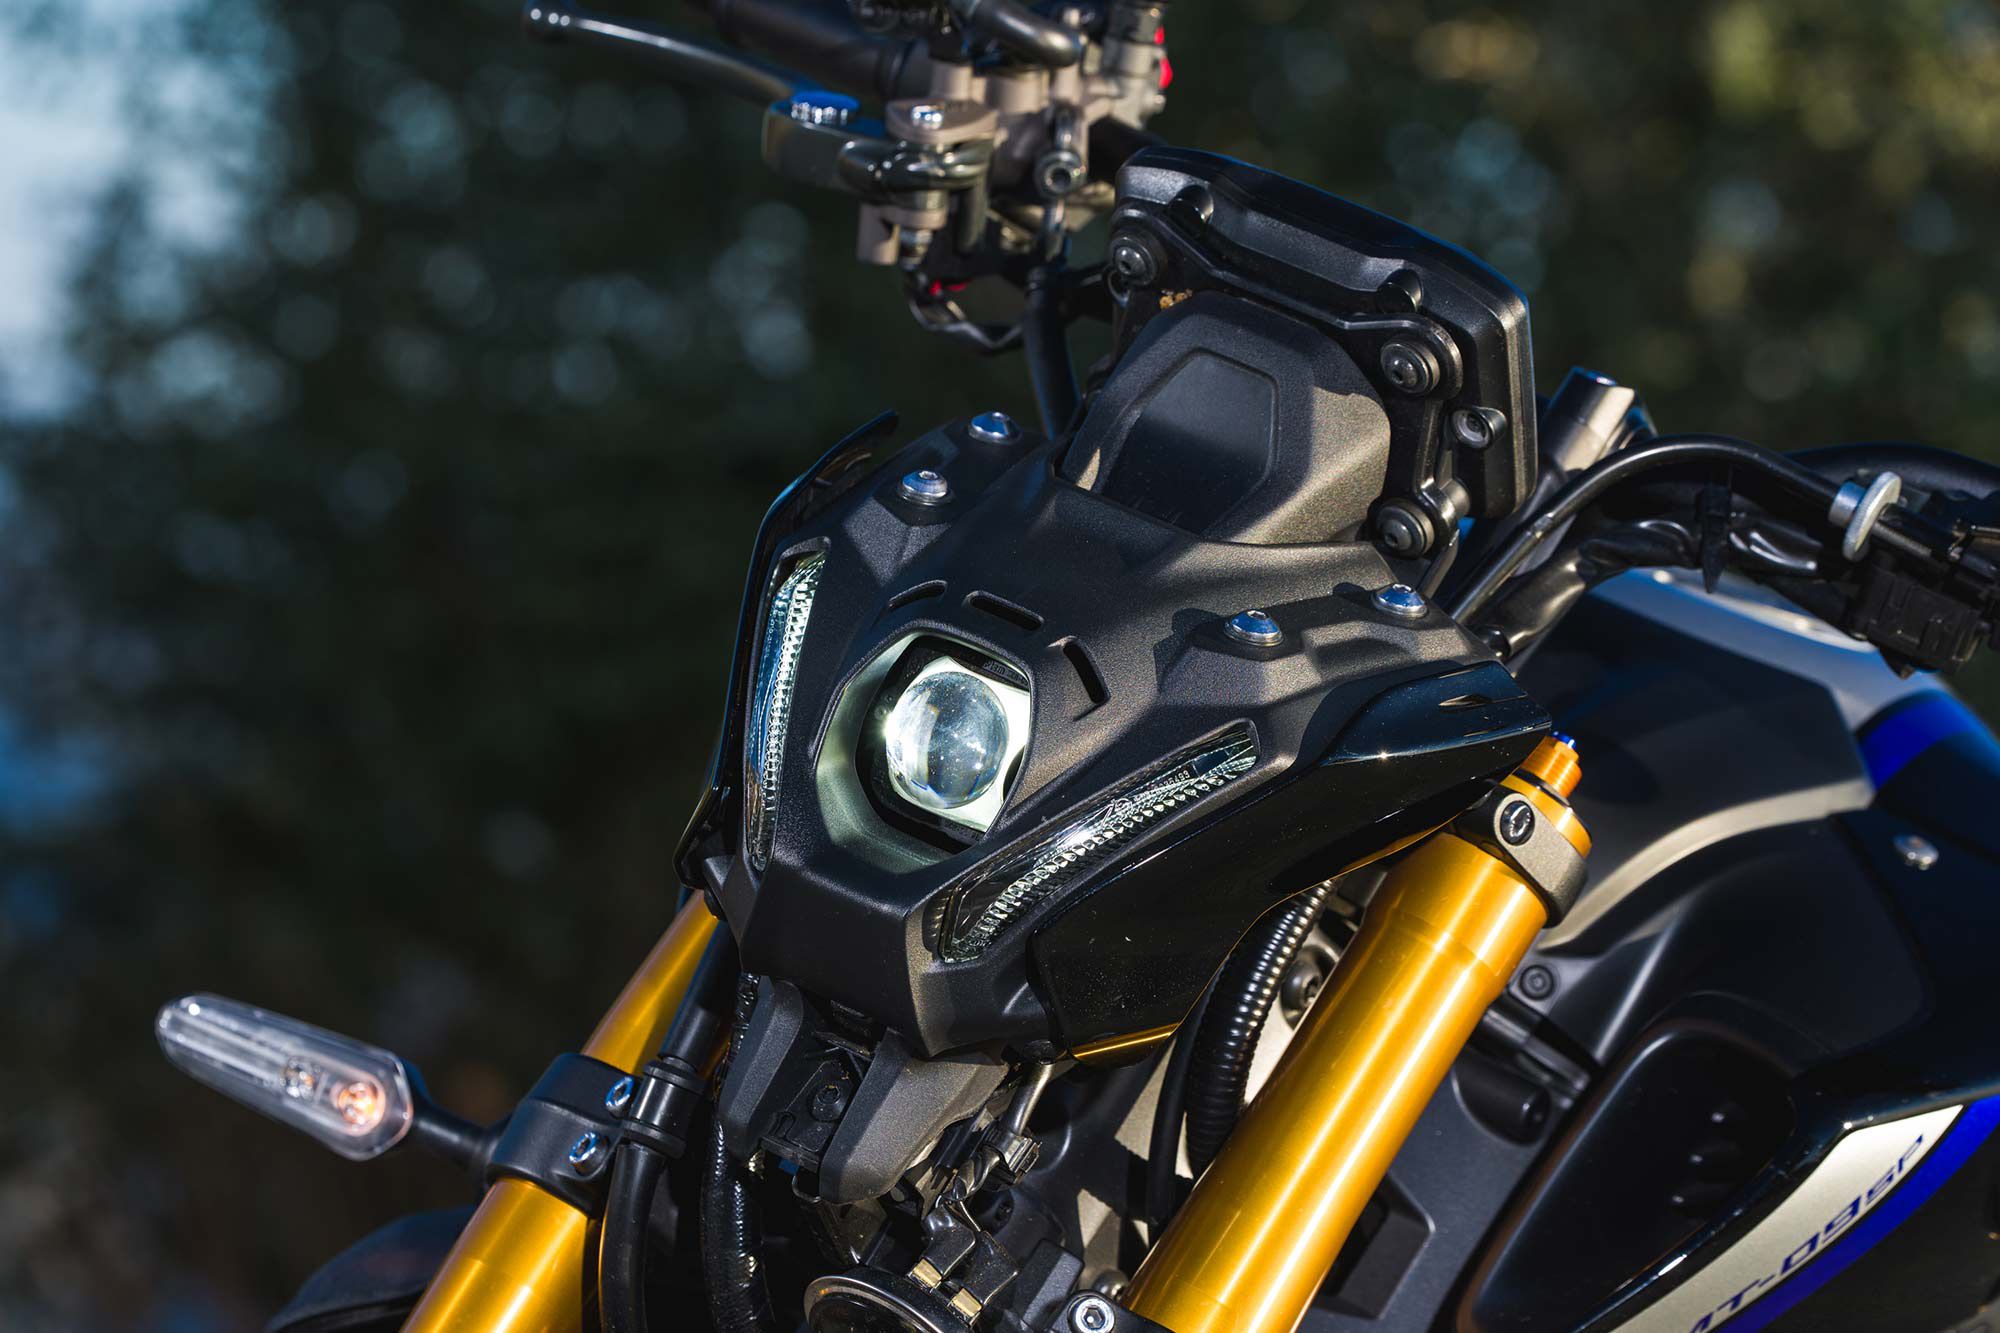 Although it looks tiny, the MT’s LED headlamp throws off a nice spread of light for night rides.